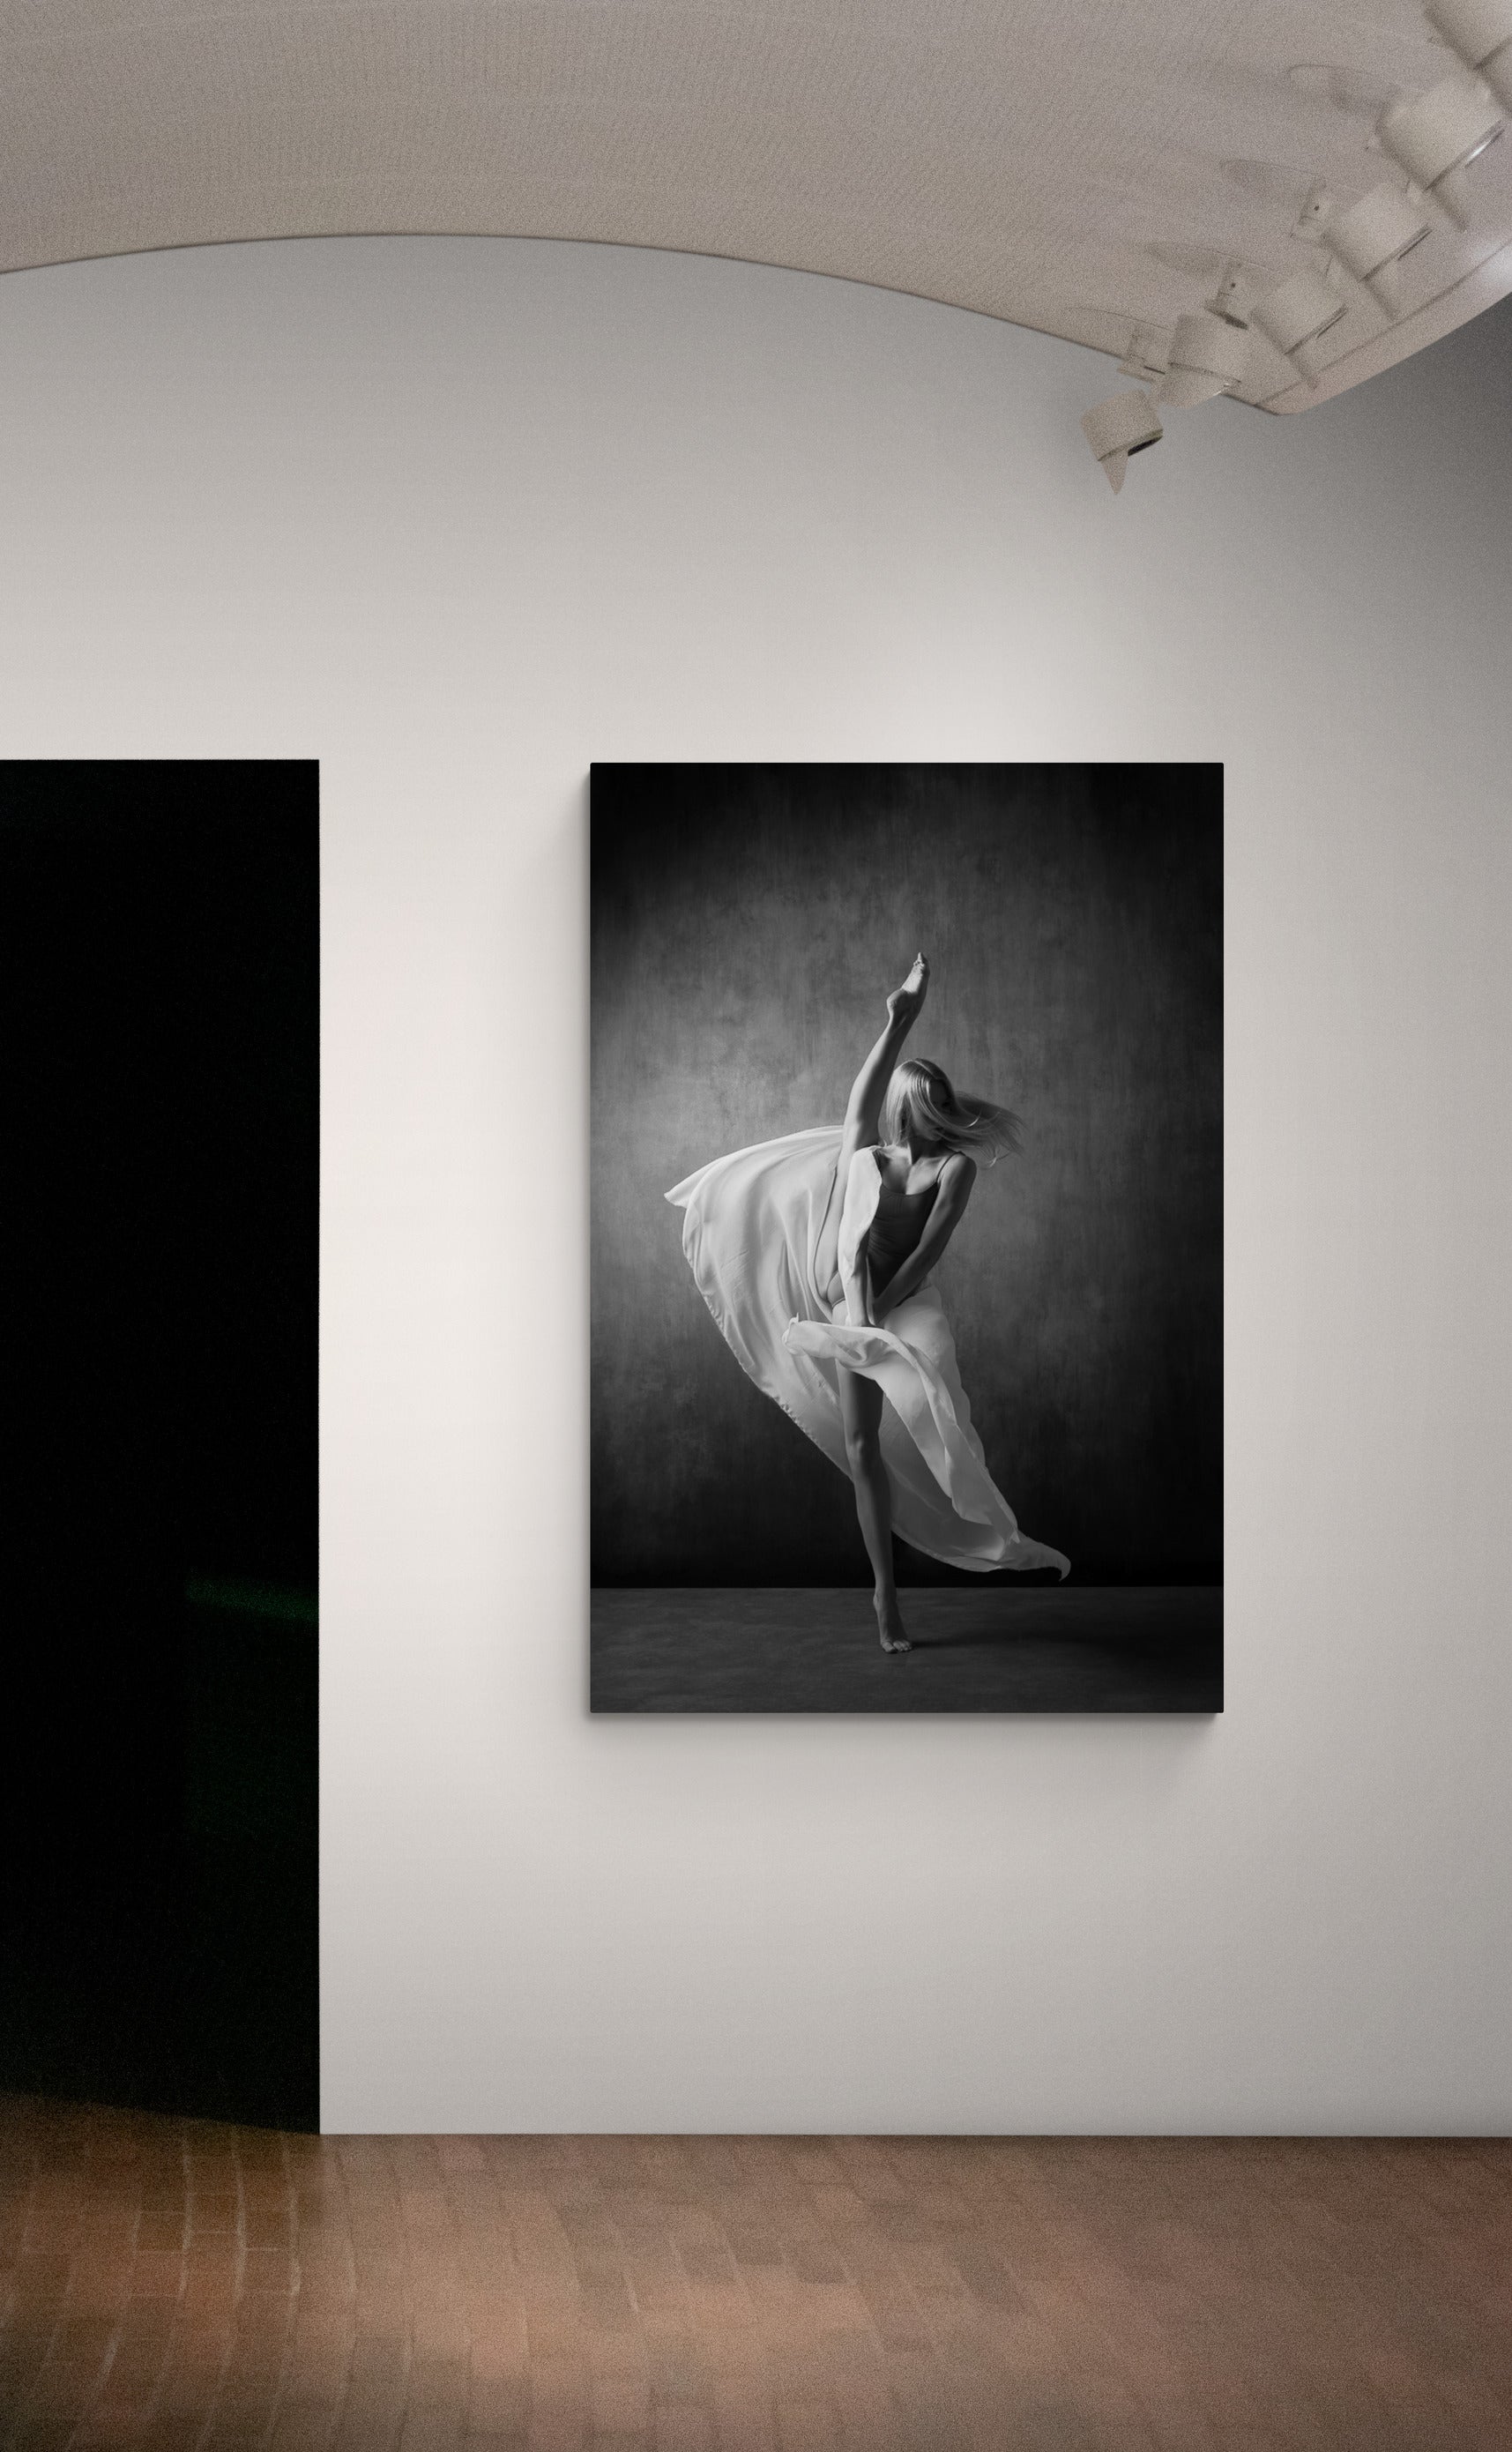 Dancing, ballerina, sexy, movement, flexibility, legs, black and white, dance photography. Art print on the gallery wall.